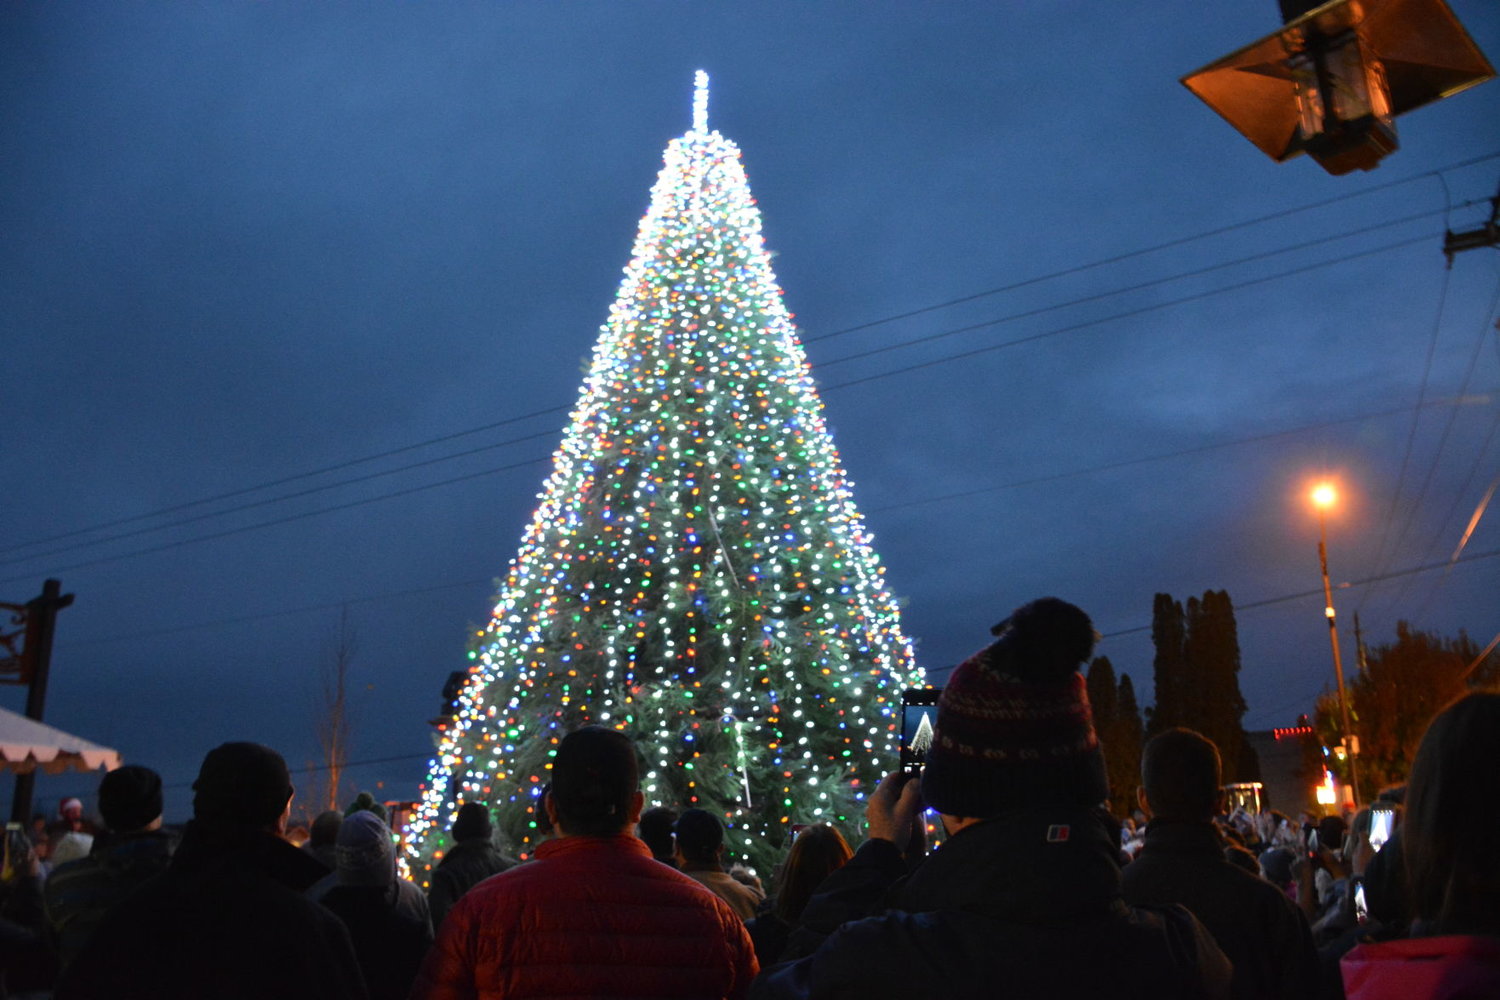 Attendees bask in the glow of Ridgefield's Christmas tree during the 2016 Hometown Celebration.